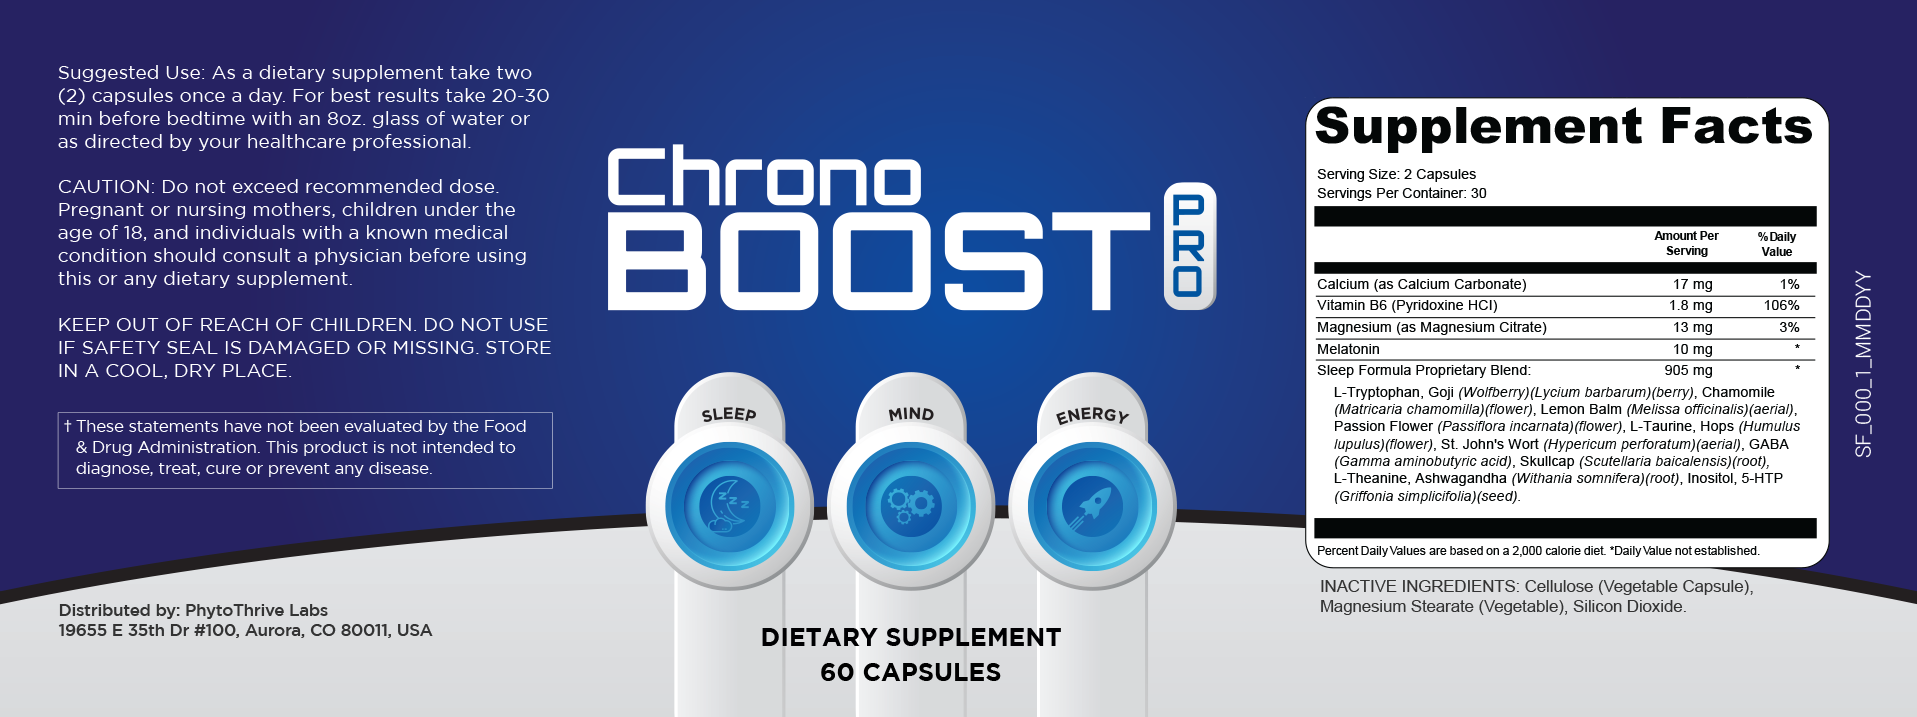 ChronoBoost Pro Supplement Facts